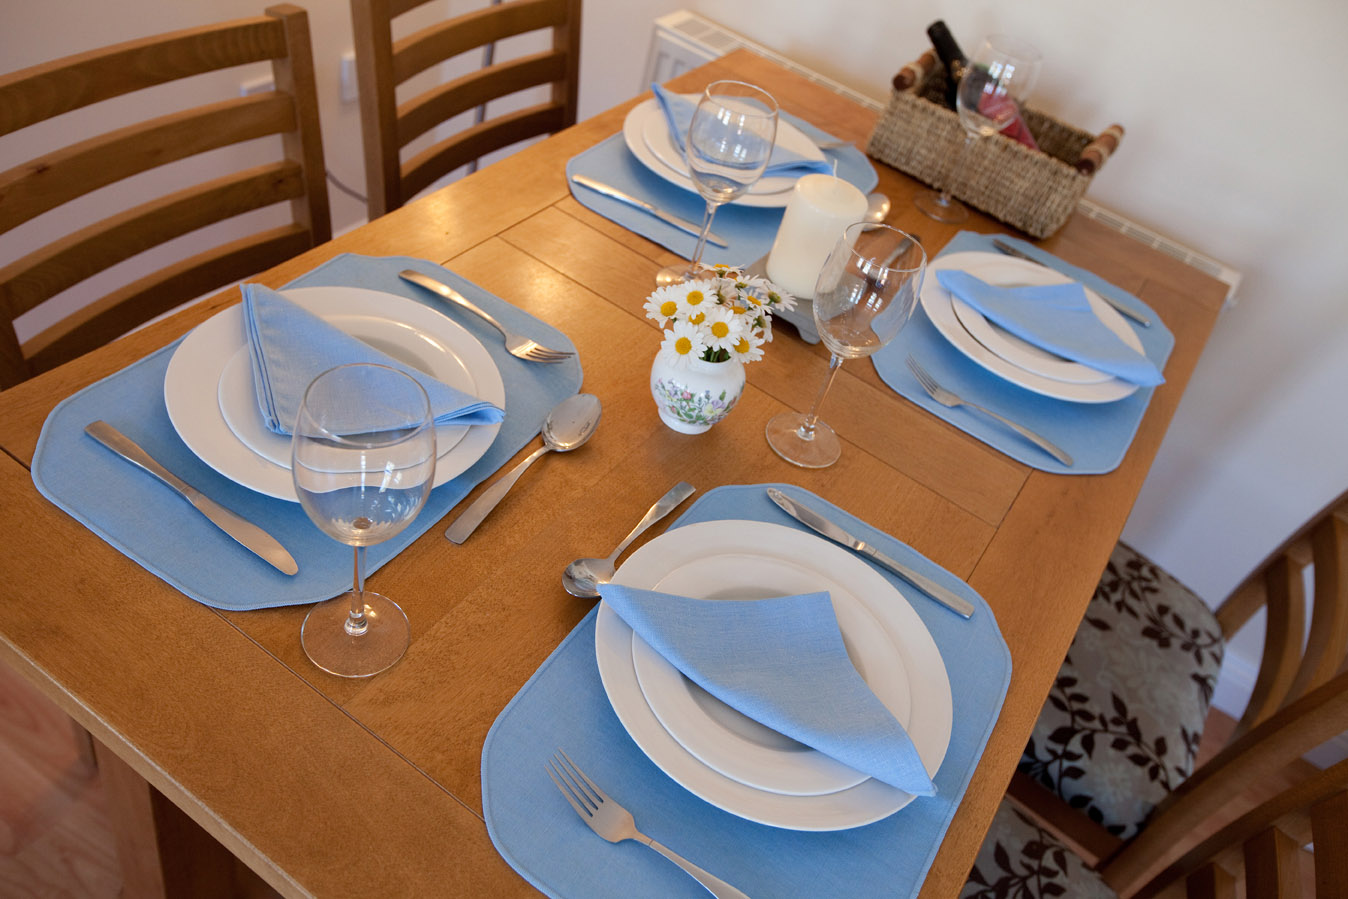 Dining table 2